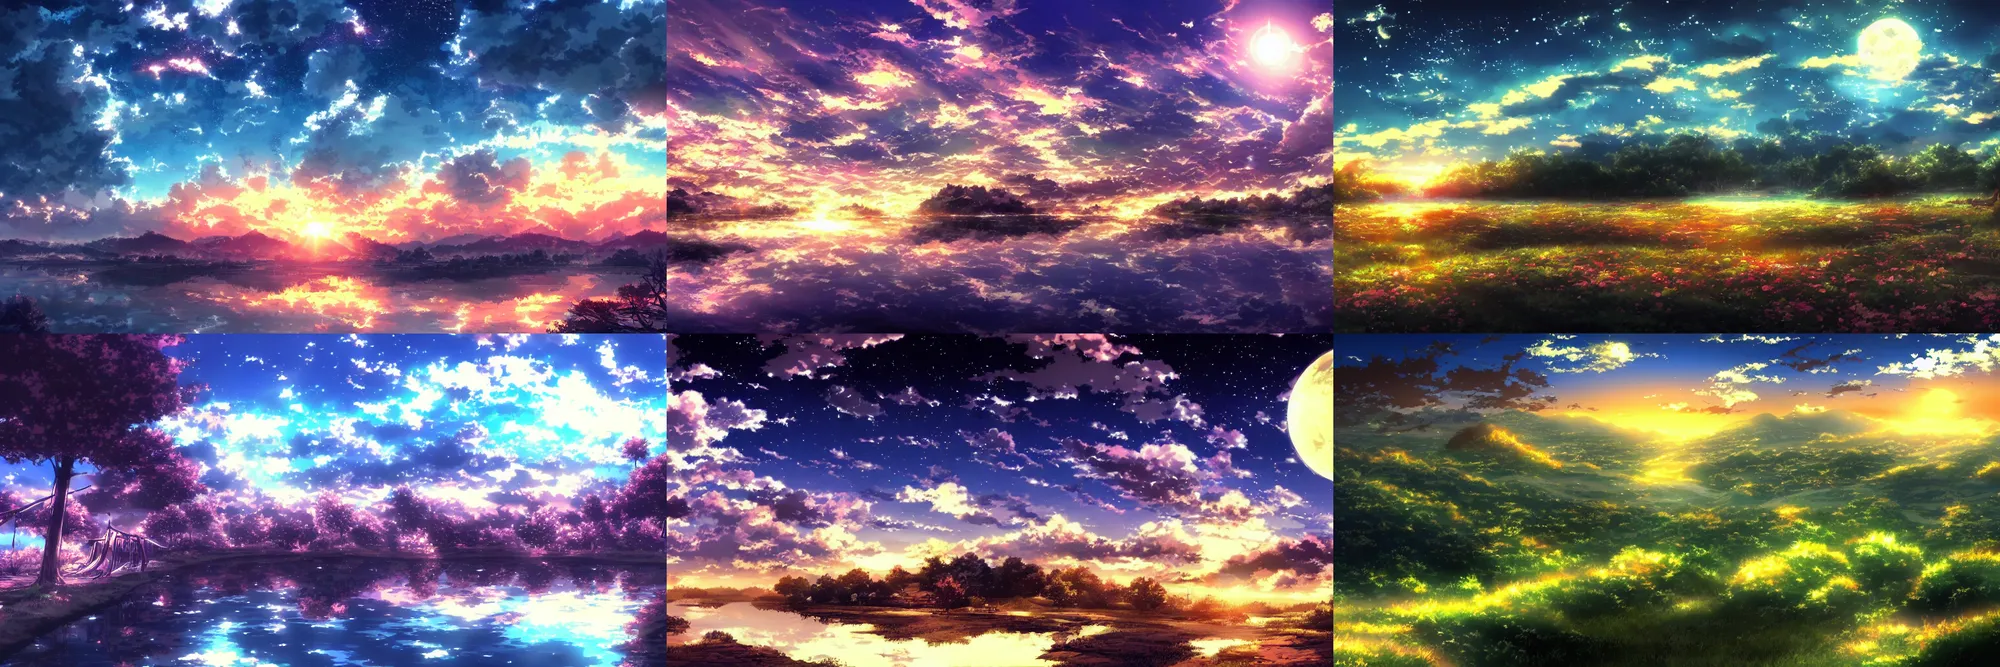 Anime Landscape [1920x1080]. : r/wallpapers